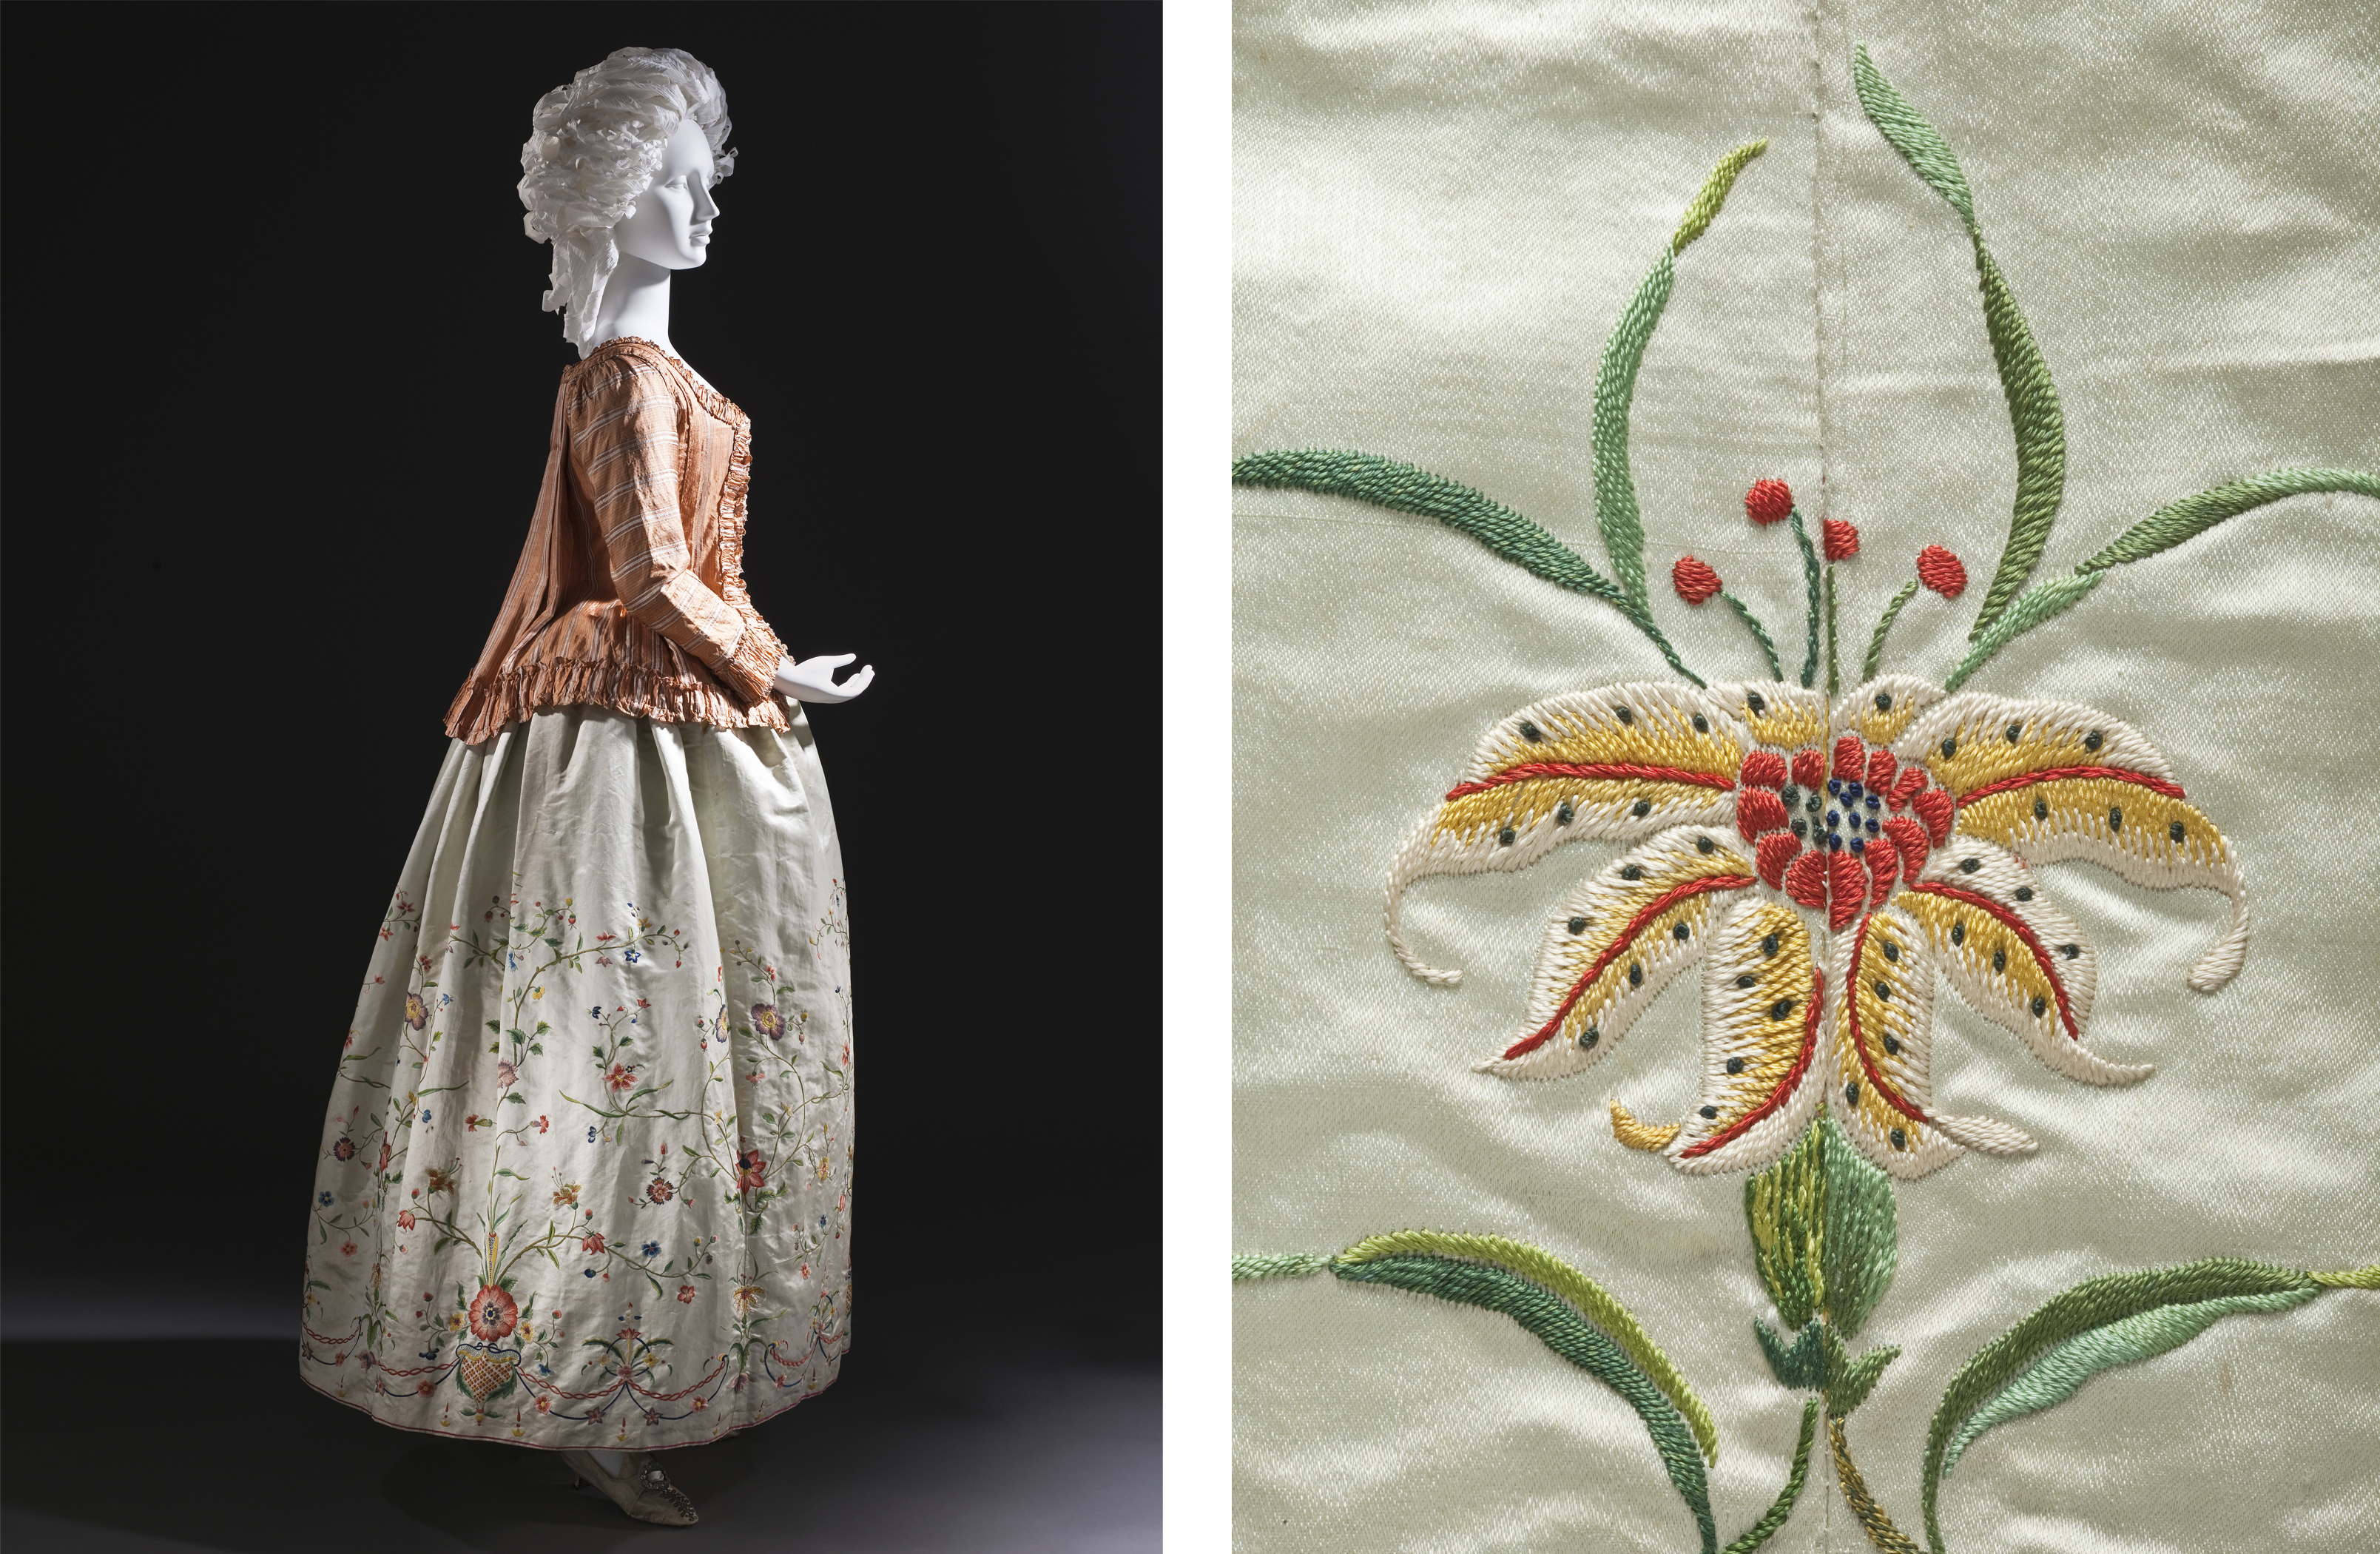 Woman's Petticoat (left: overall; right: detail), China for the Western market, c. 1785, Los Angeles County Museum of Art, purchased with funds provided by Suzanne A. Saperstein and Michael and Ellen Michelson, with additional funding from the Costume Council, the Edgerton Foundation, Gail and Gerald Oppenheimer, Maureen H. Shapiro, Grace Tsao, and Lenore and Richard Wayne, photos © Museum Associates/LACMA